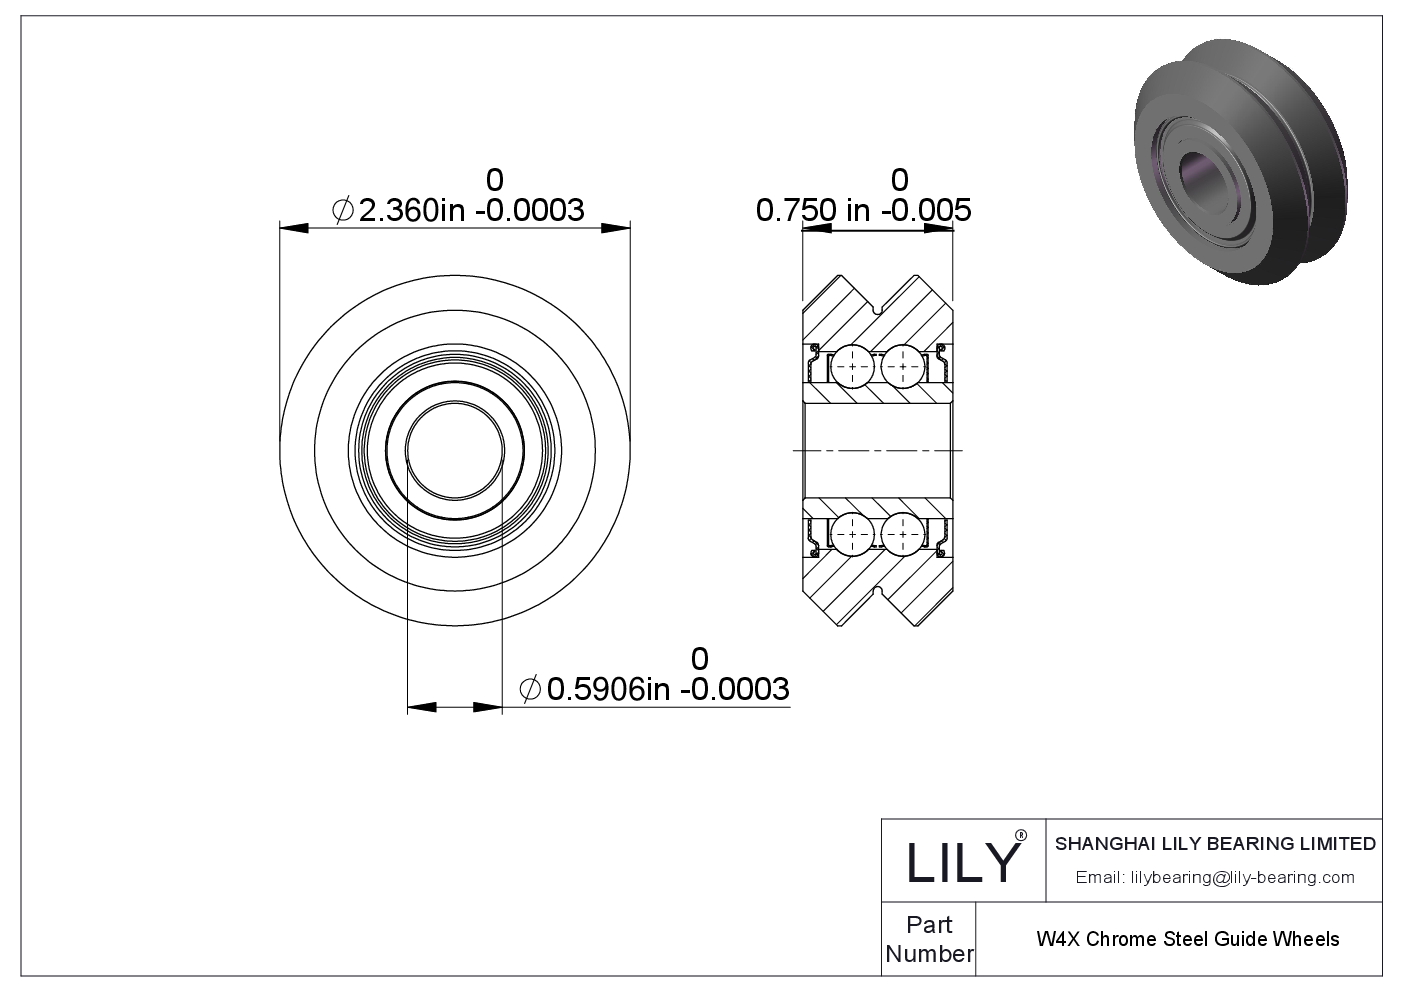 W4X Chrome Steel Guide Wheels cad drawing